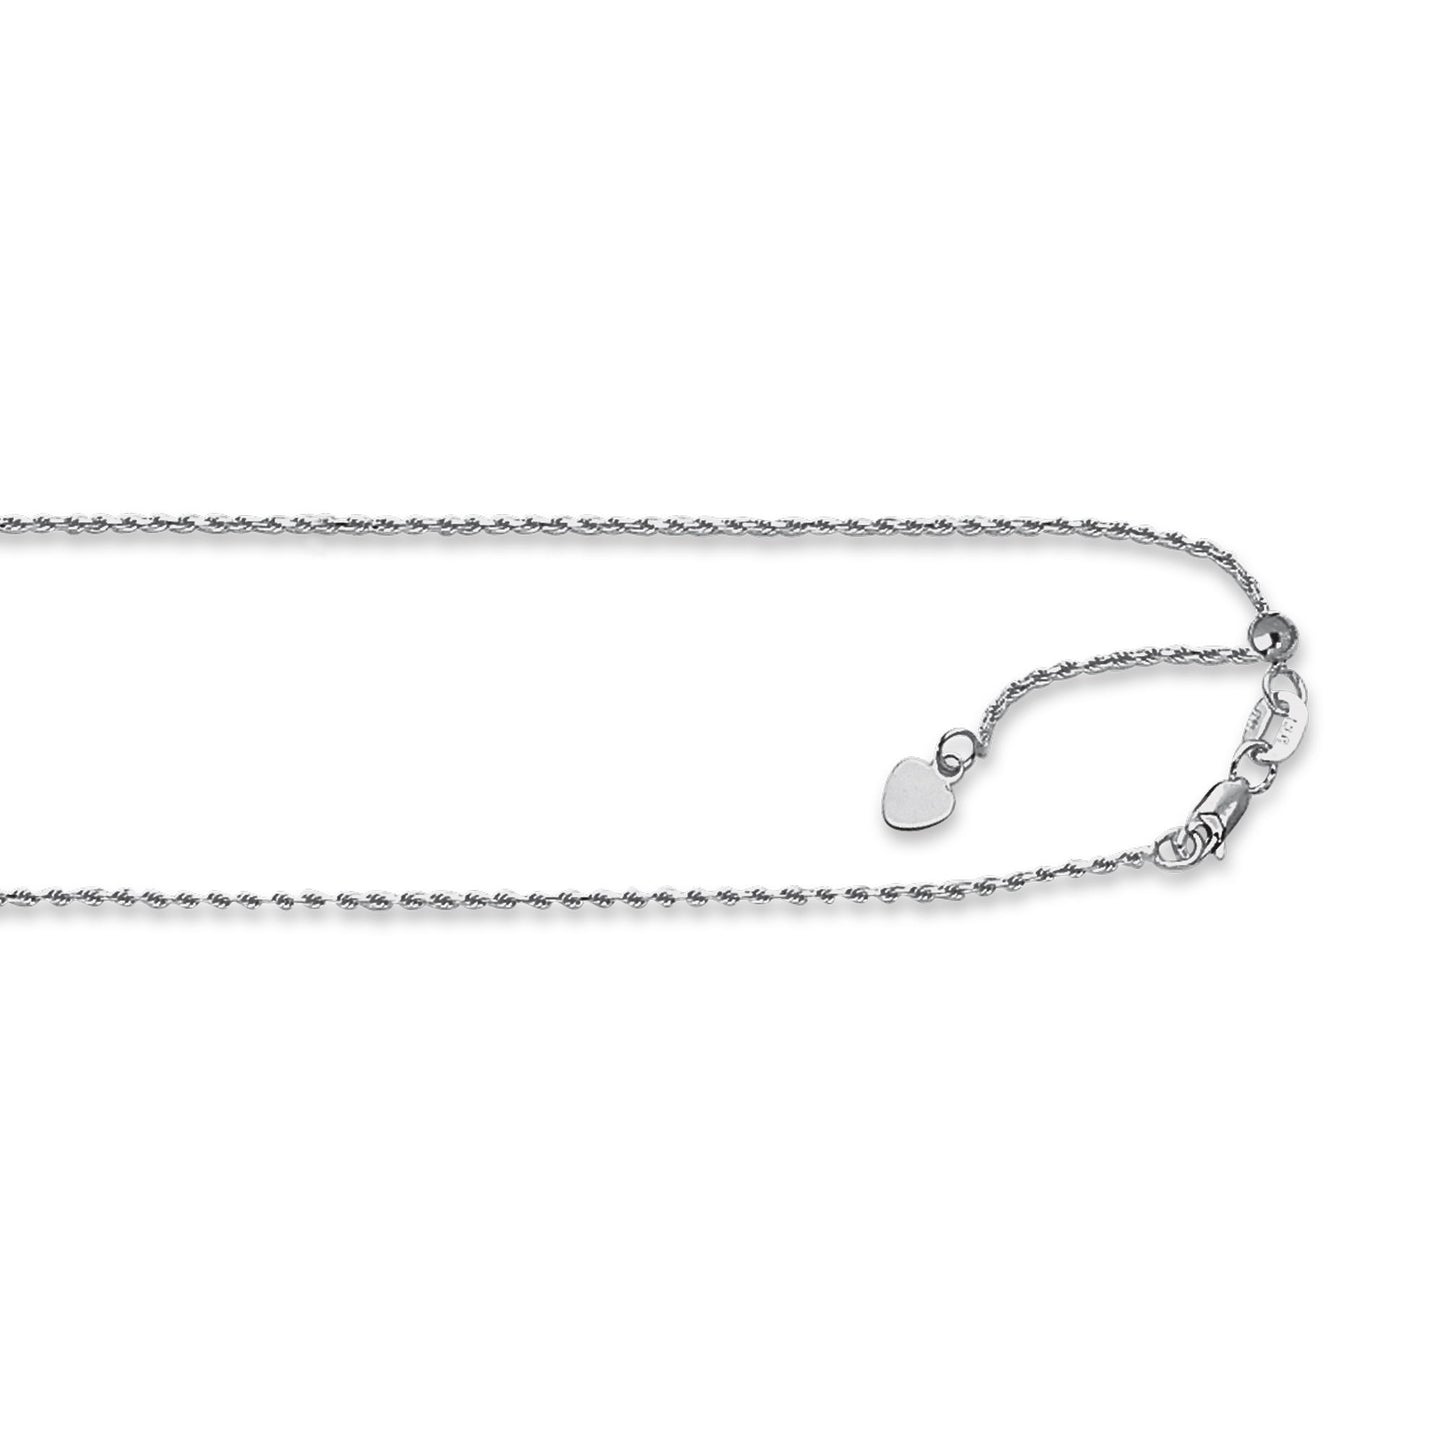 14K Gold Adjustable Rope Chain with Lobster Lock